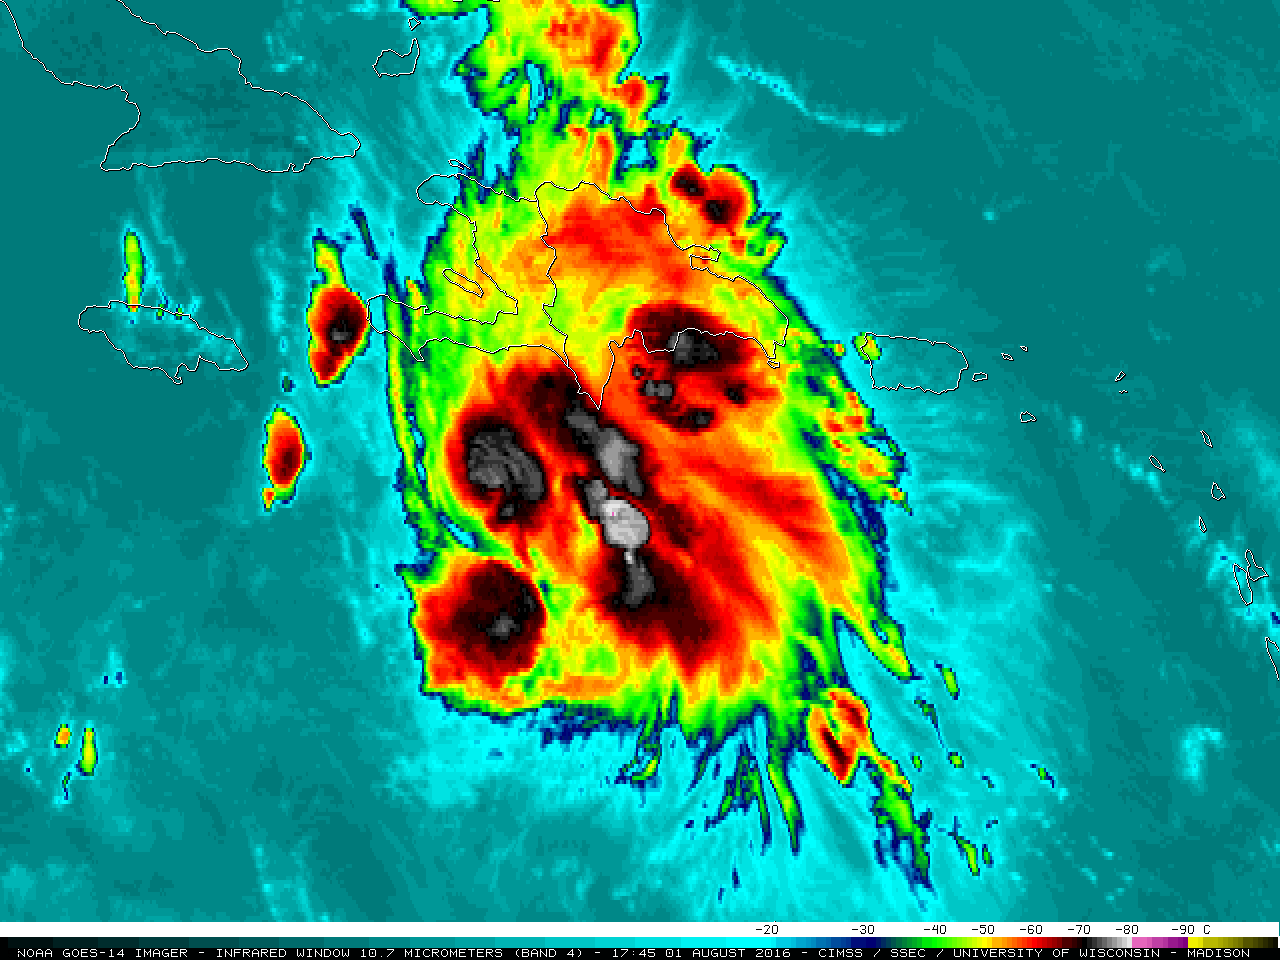 GOES-14 Infrared Window (10.7 um) images [click to play animation]